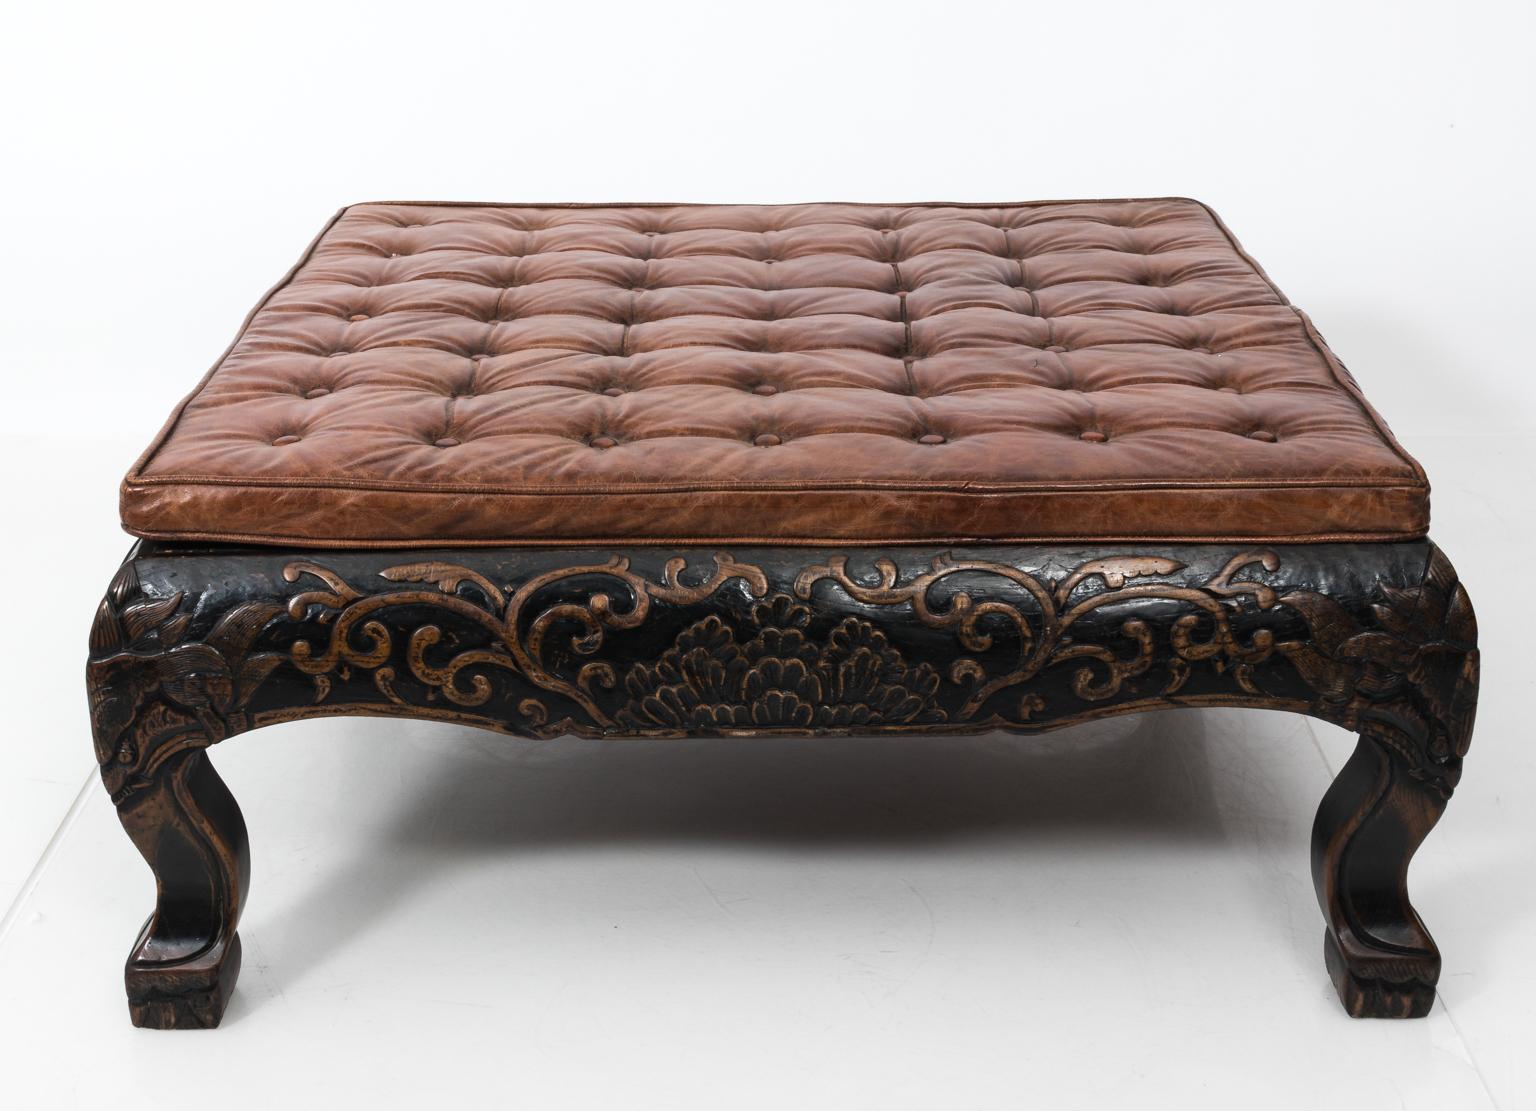 Carved Leather Tufted Ottoman 3